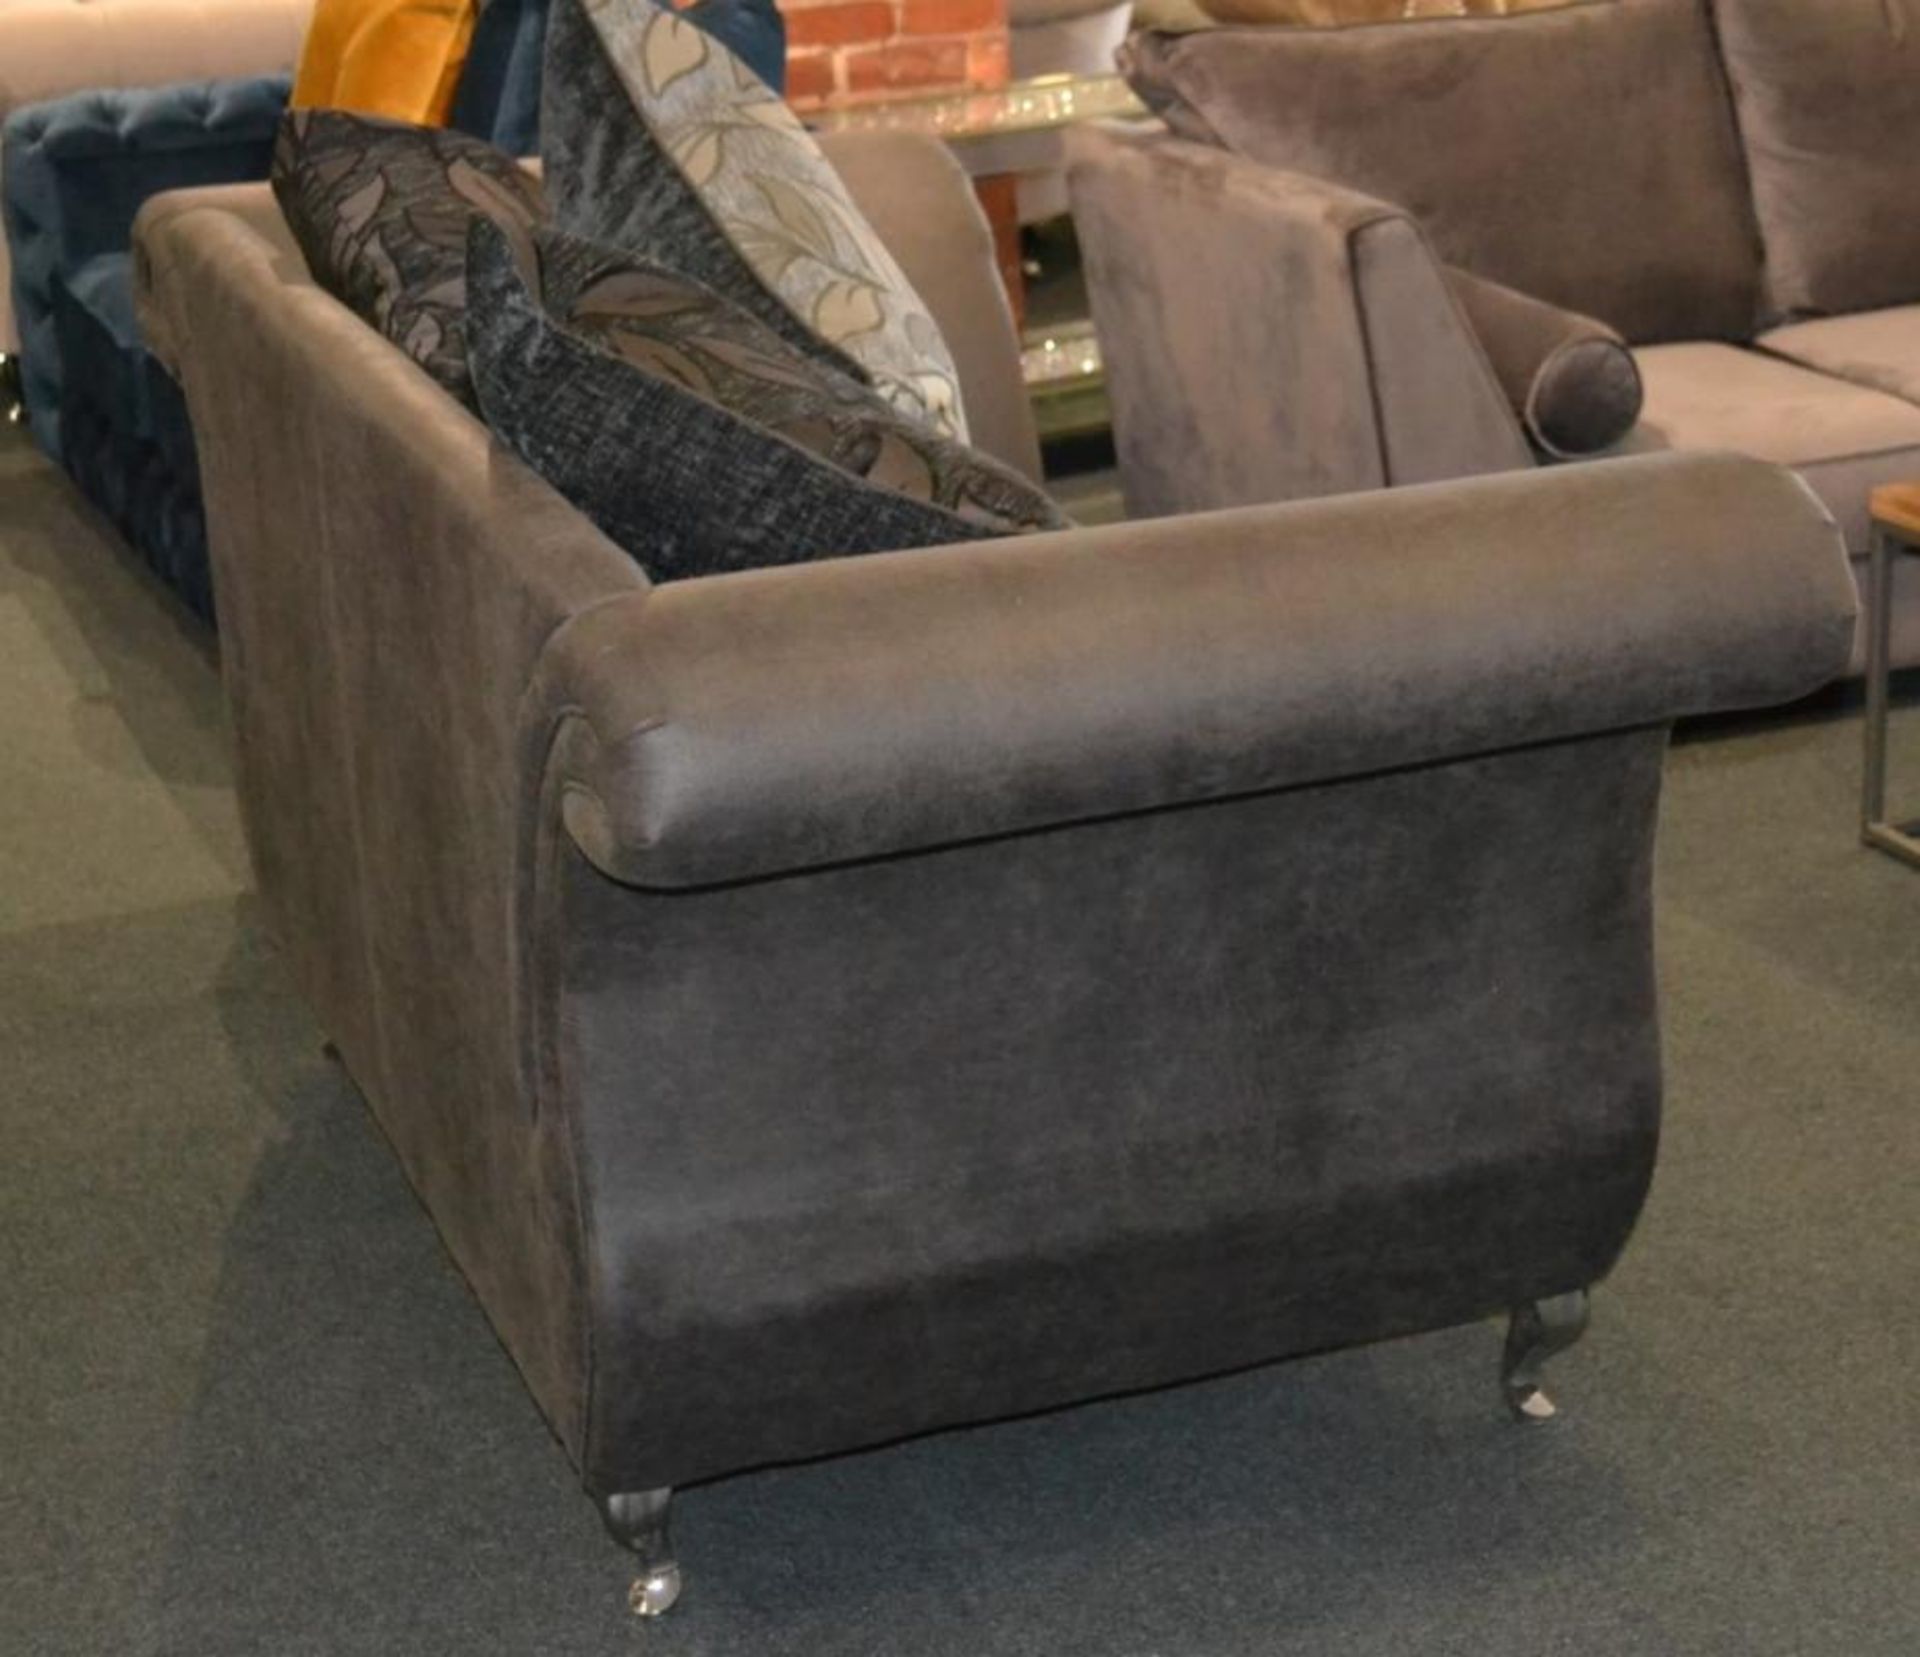 1 x Stylish Bespoke Double Seater Sofa. This sofa is covered in a soft dark grey leatherette with th - Image 4 of 5